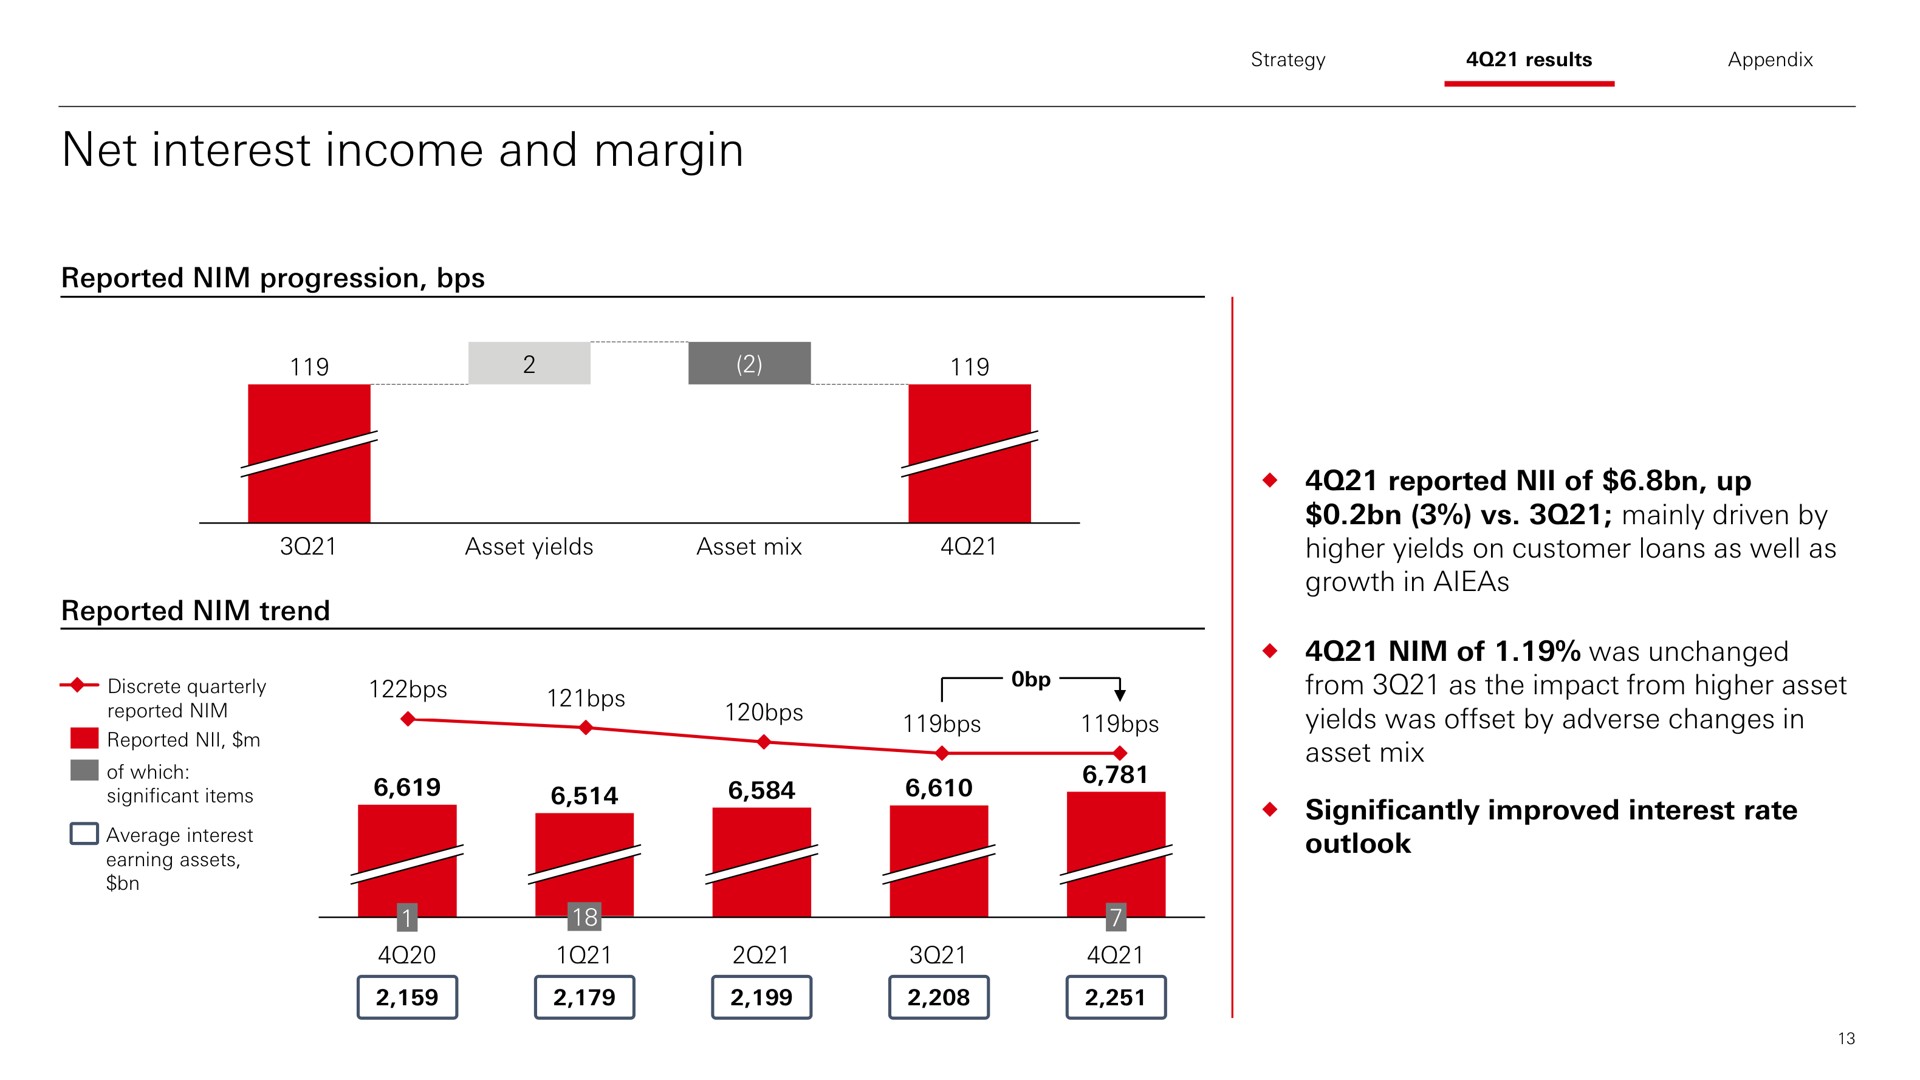 net interest income and margin | HSBC